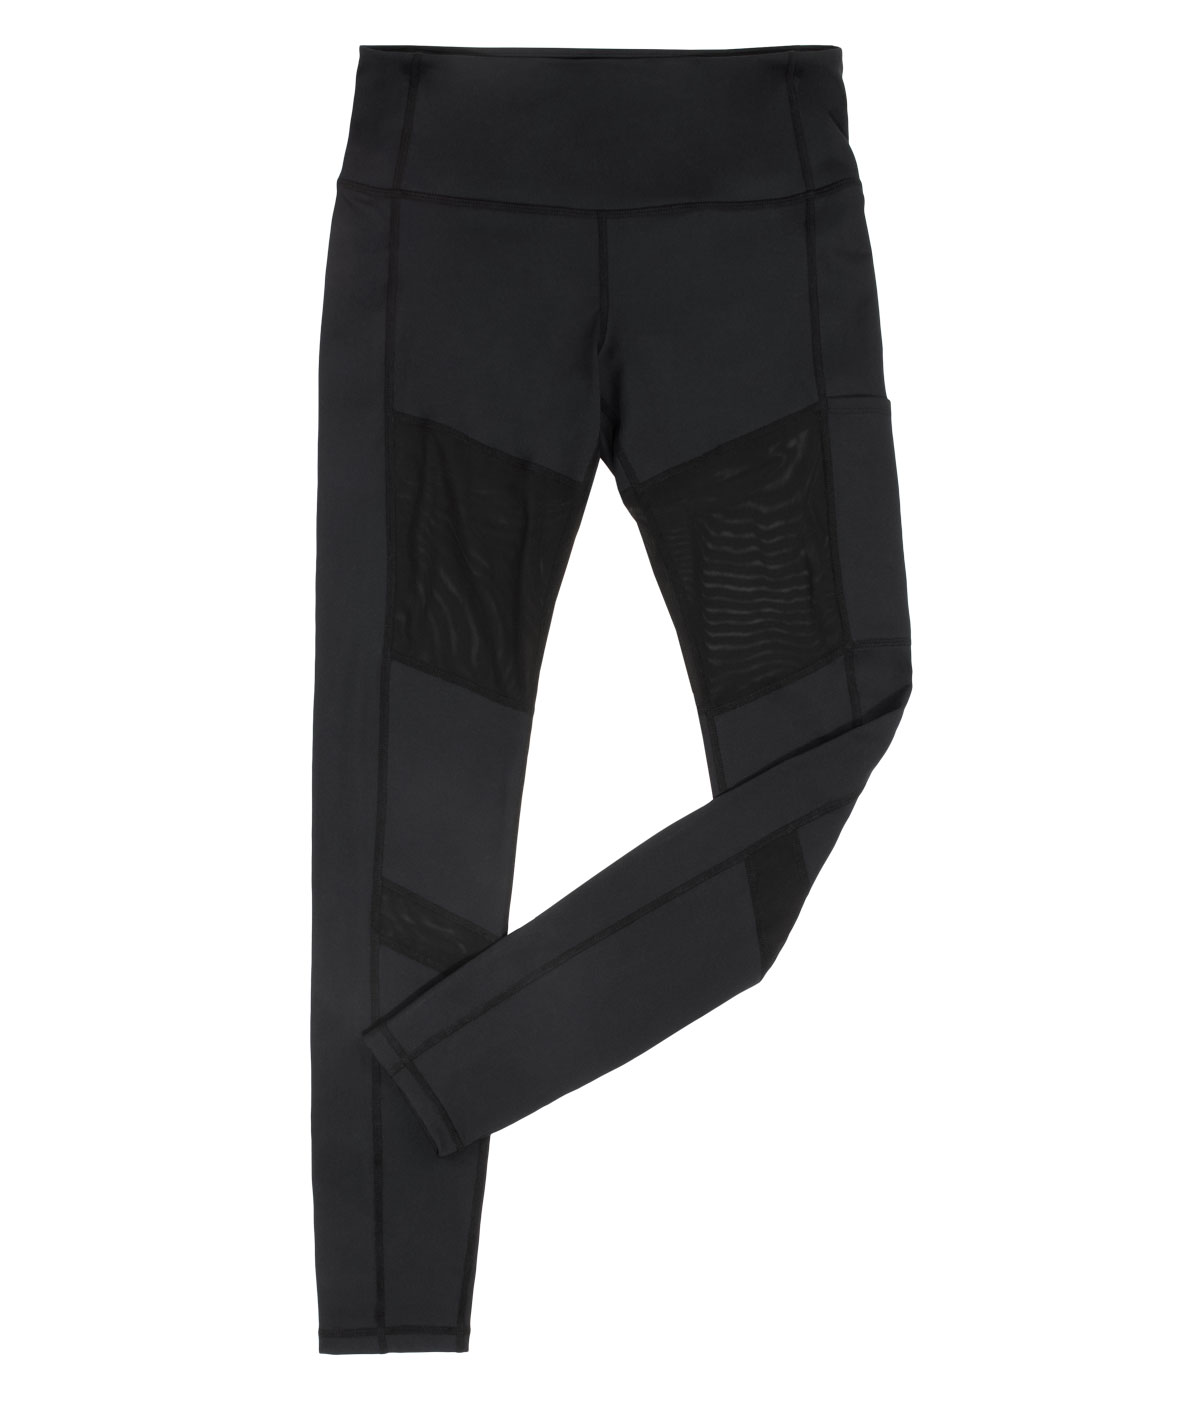 Chasse Performance Competitor Legging